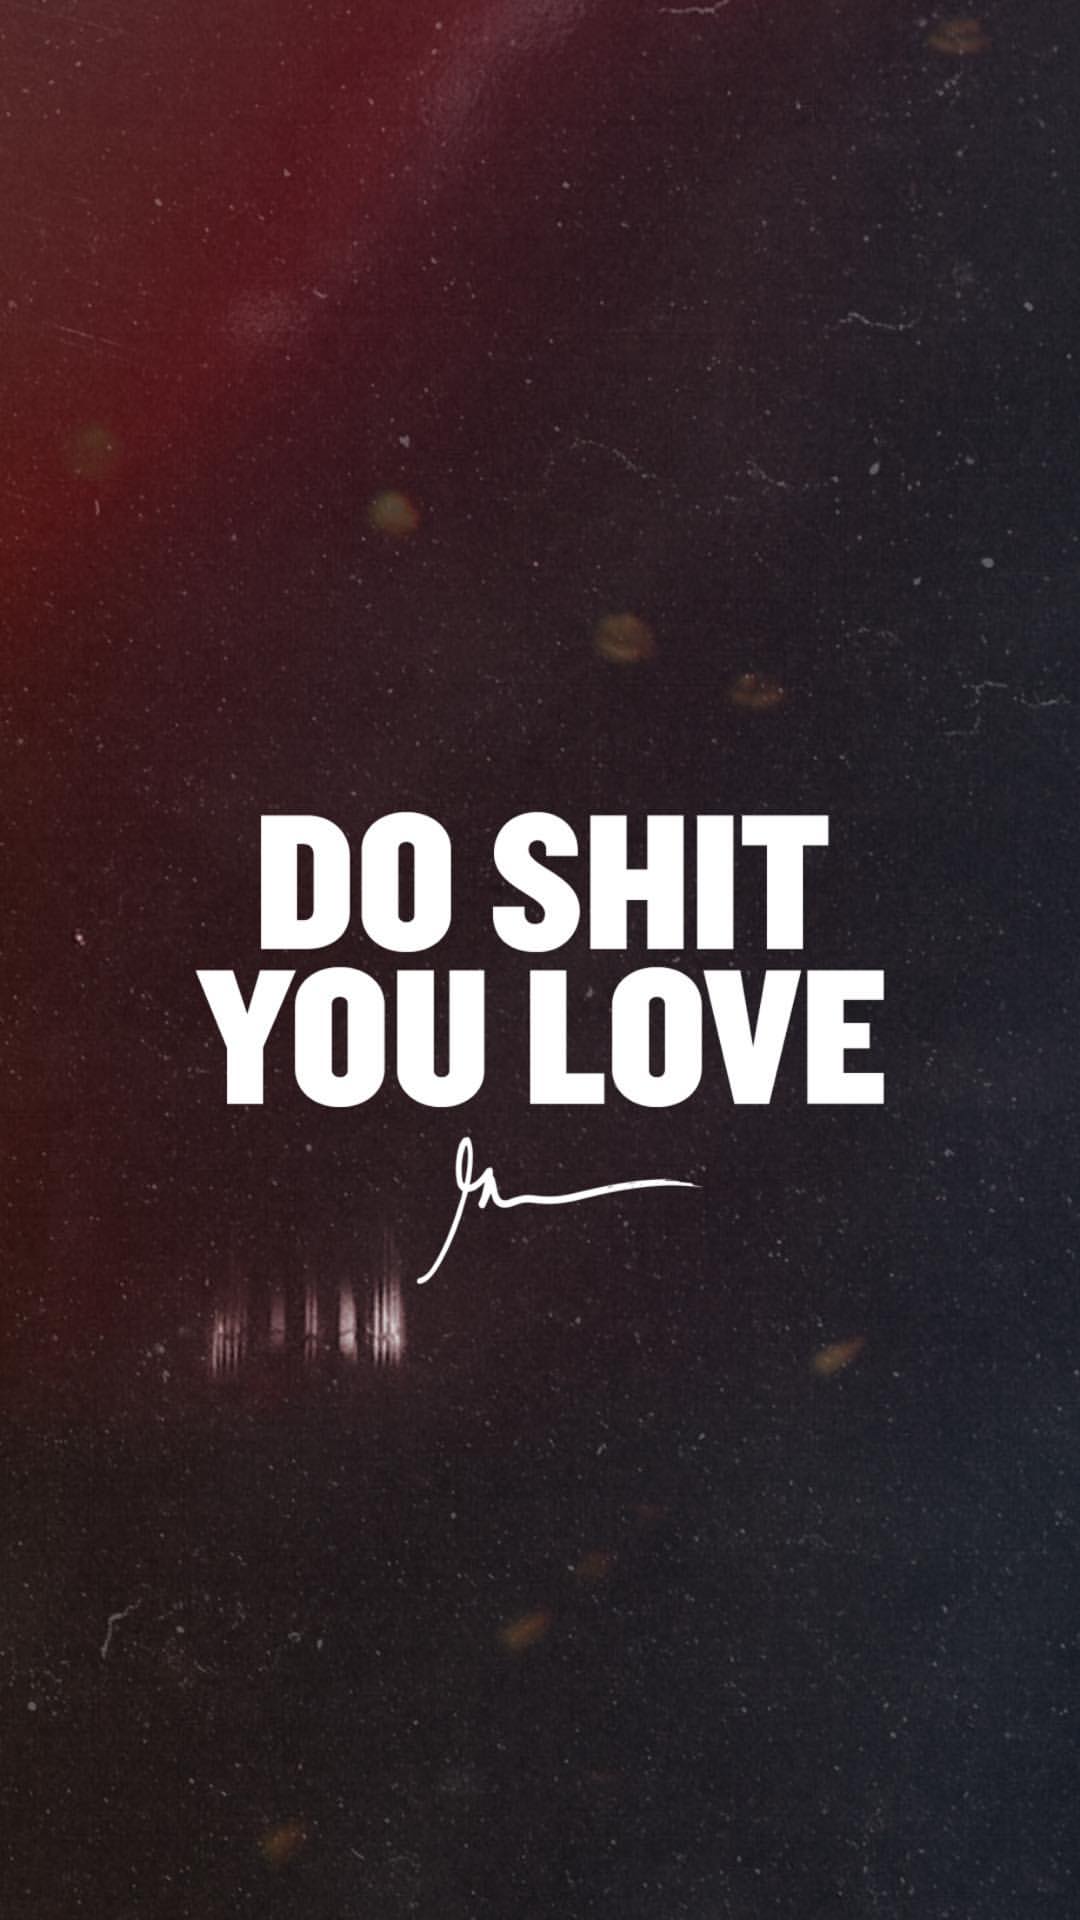 Gary Vaynerchuk Wallpapers Gary Vee Do What You Love 3059264 Hd Wallpaper Backgrounds Download